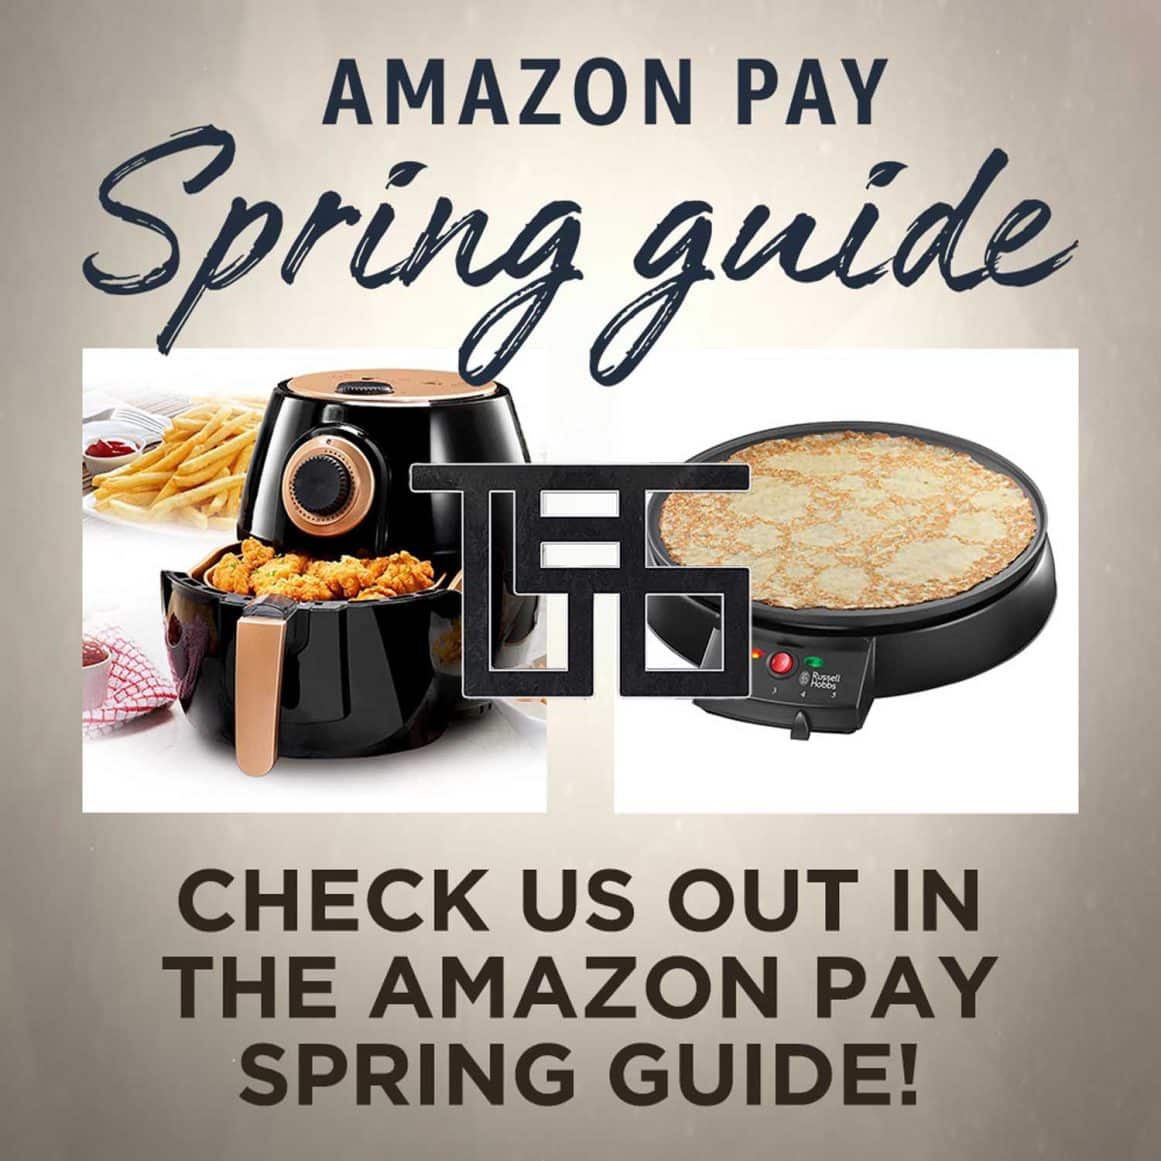 Amazon Pay Spring Guide 2021